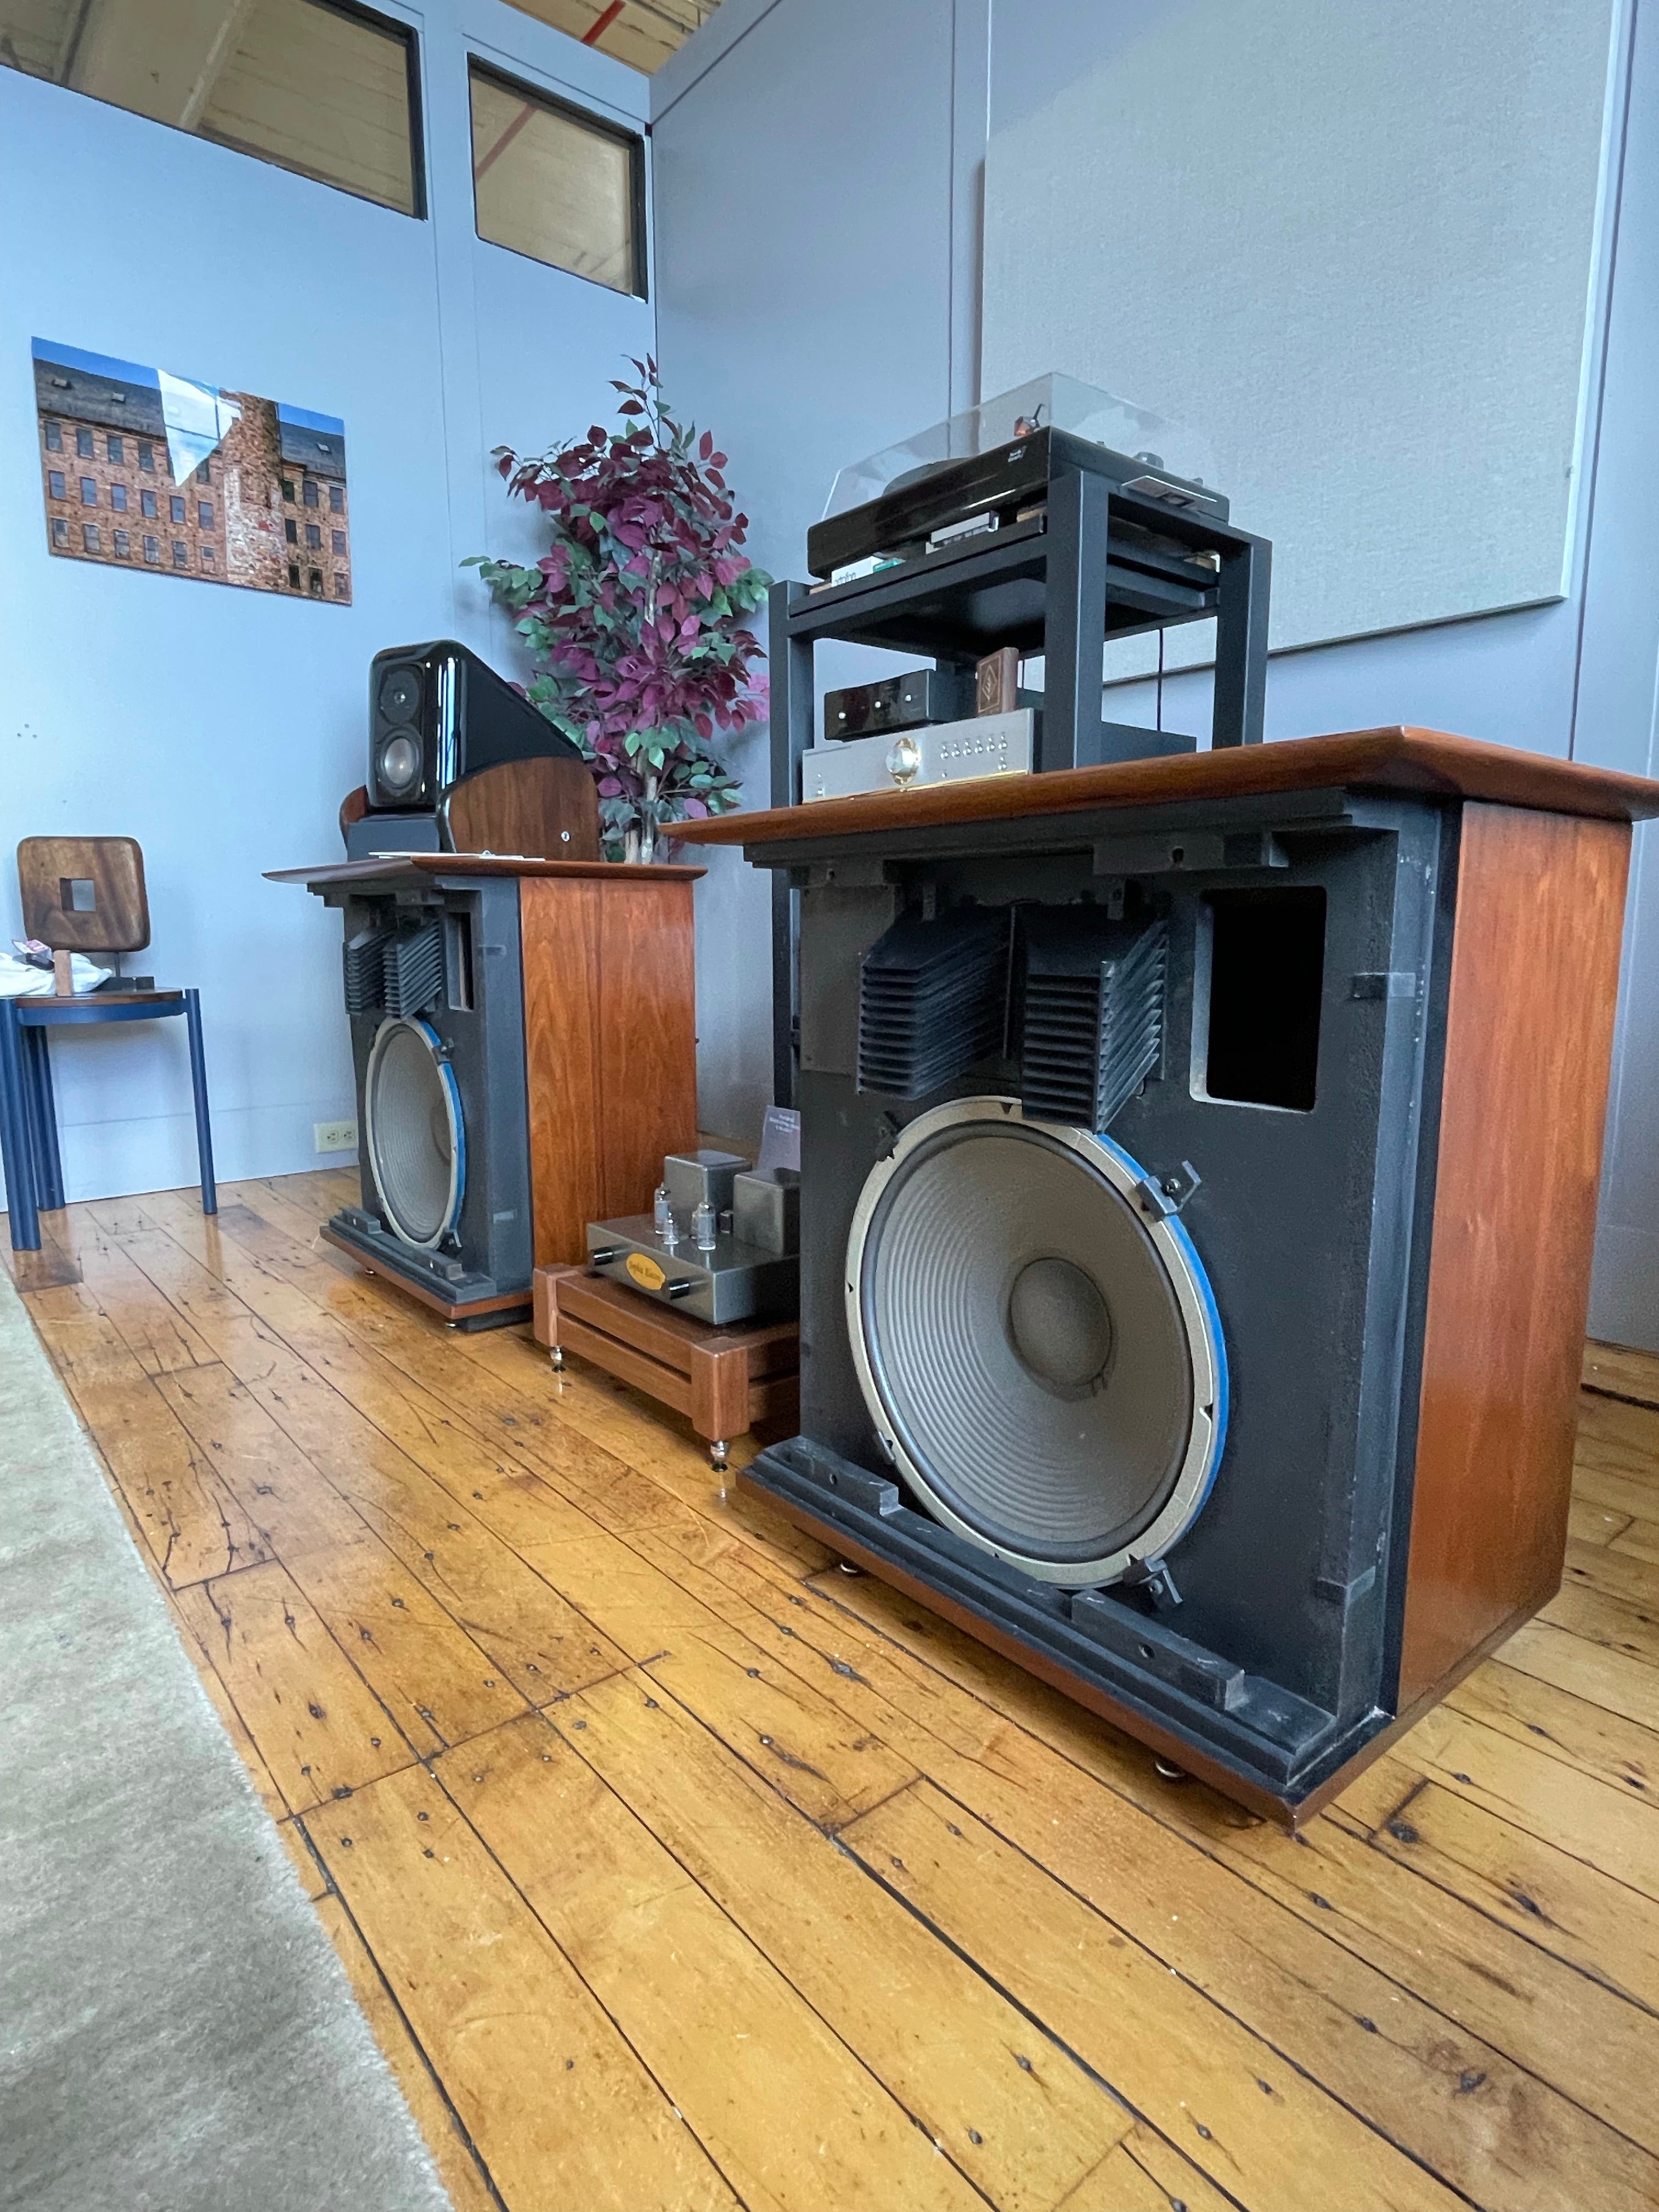 JBL C51 (S7) "Apollo" With Blue Basket Drivers, Stunning! - SOLD